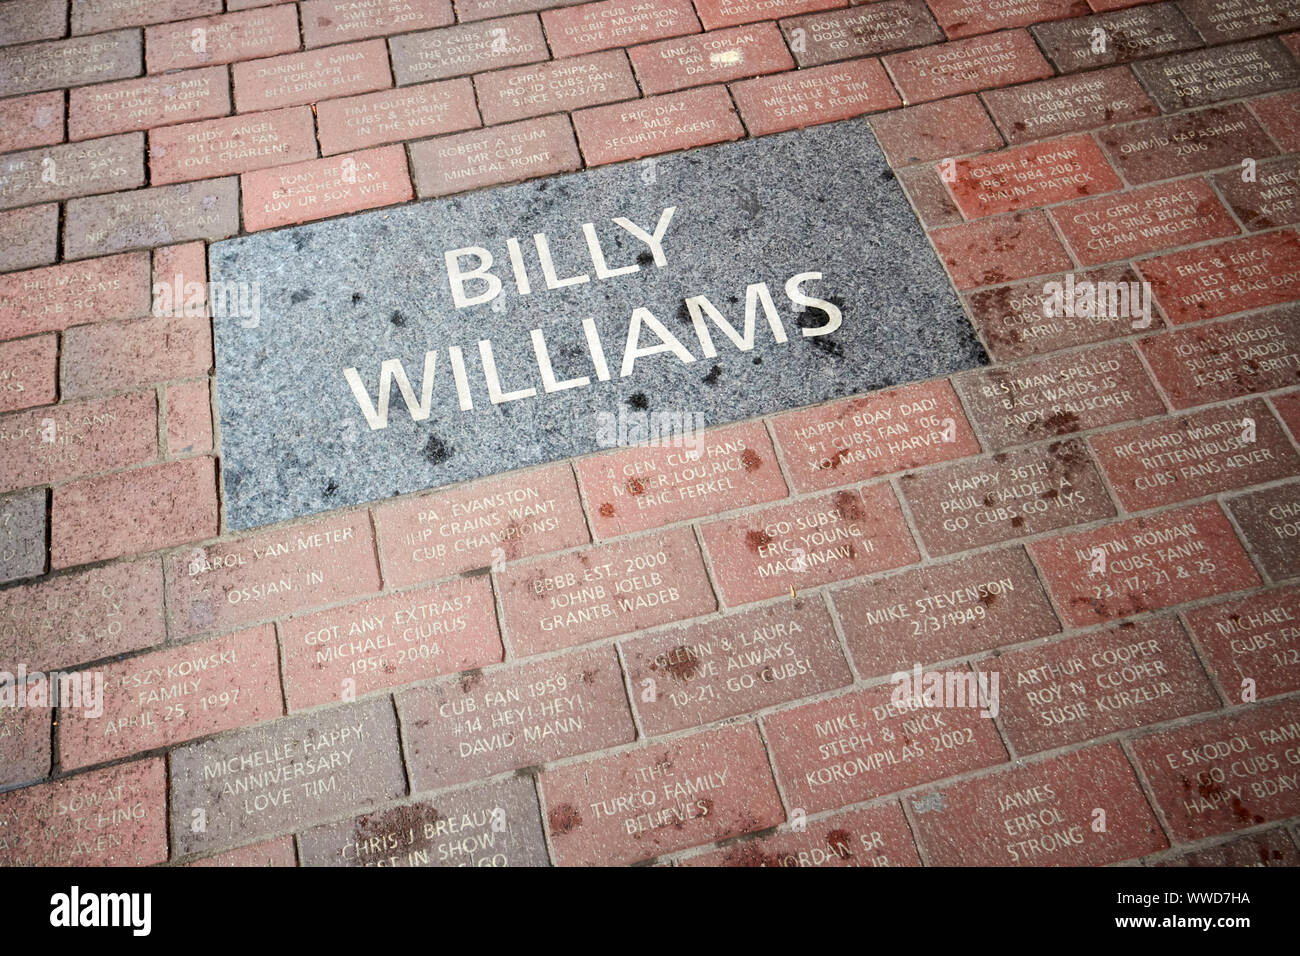 billy williams named paving slab and street bricks sponsored by individuals and supporters wrigley field Chicago Illinois USA Stock Photo